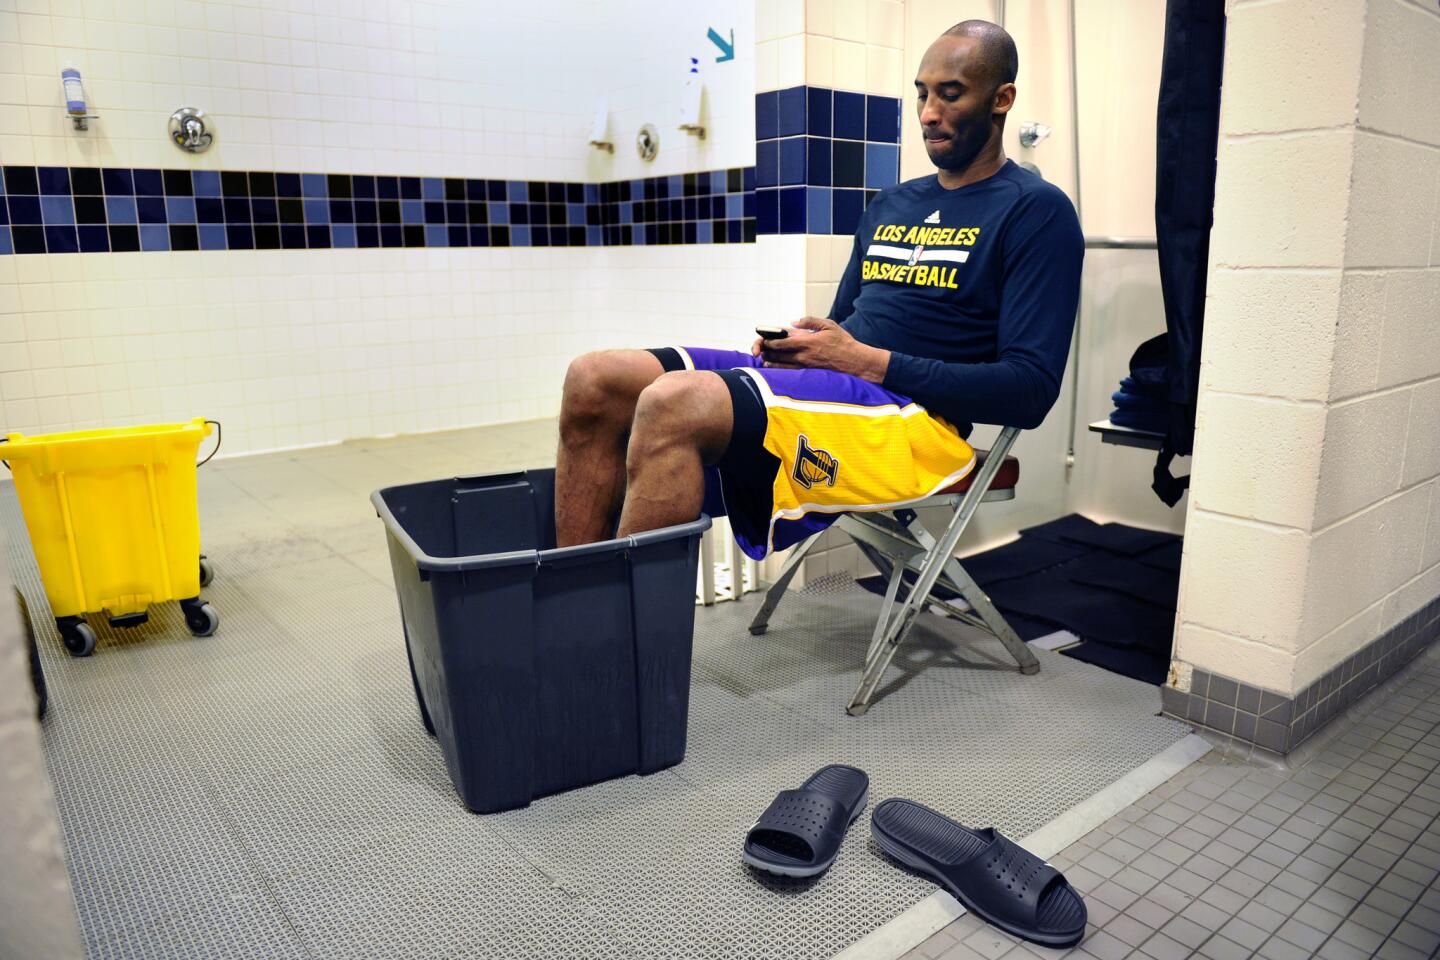 Kobe Bryant checks his phone as he soaks his feet in a bucket of ice water before a game with the Rockets in Houston.